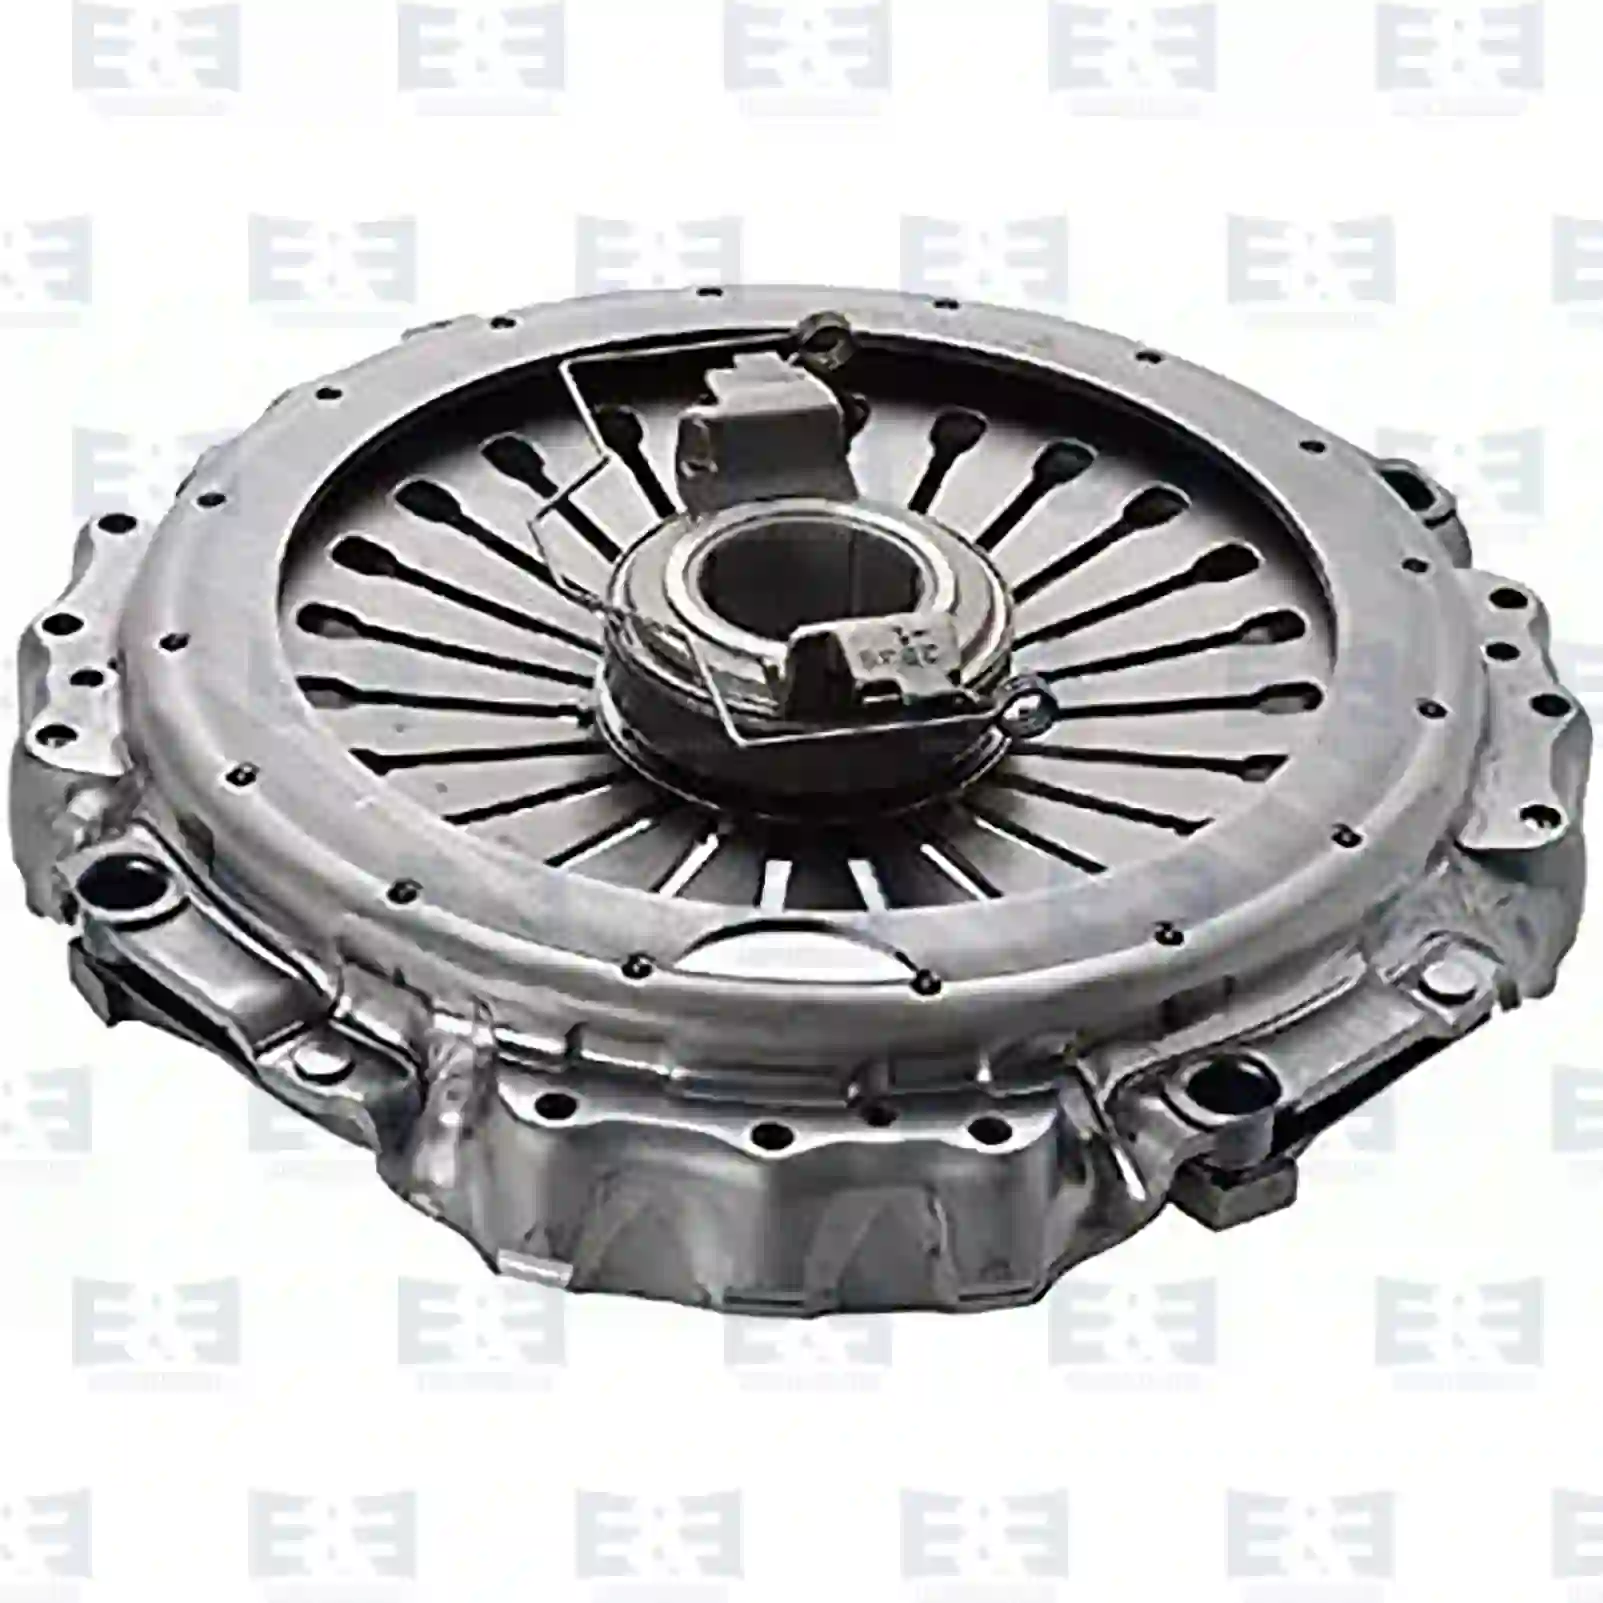 Clutch cover, with release bearing, 2E2288707, 85000266, 20569134, 85000266, 0074207022, 7420707022, 20569134, 3192782, 8113894, 8119894, 85000529 ||  2E2288707 E&E Truck Spare Parts | Truck Spare Parts, Auotomotive Spare Parts Clutch cover, with release bearing, 2E2288707, 85000266, 20569134, 85000266, 0074207022, 7420707022, 20569134, 3192782, 8113894, 8119894, 85000529 ||  2E2288707 E&E Truck Spare Parts | Truck Spare Parts, Auotomotive Spare Parts